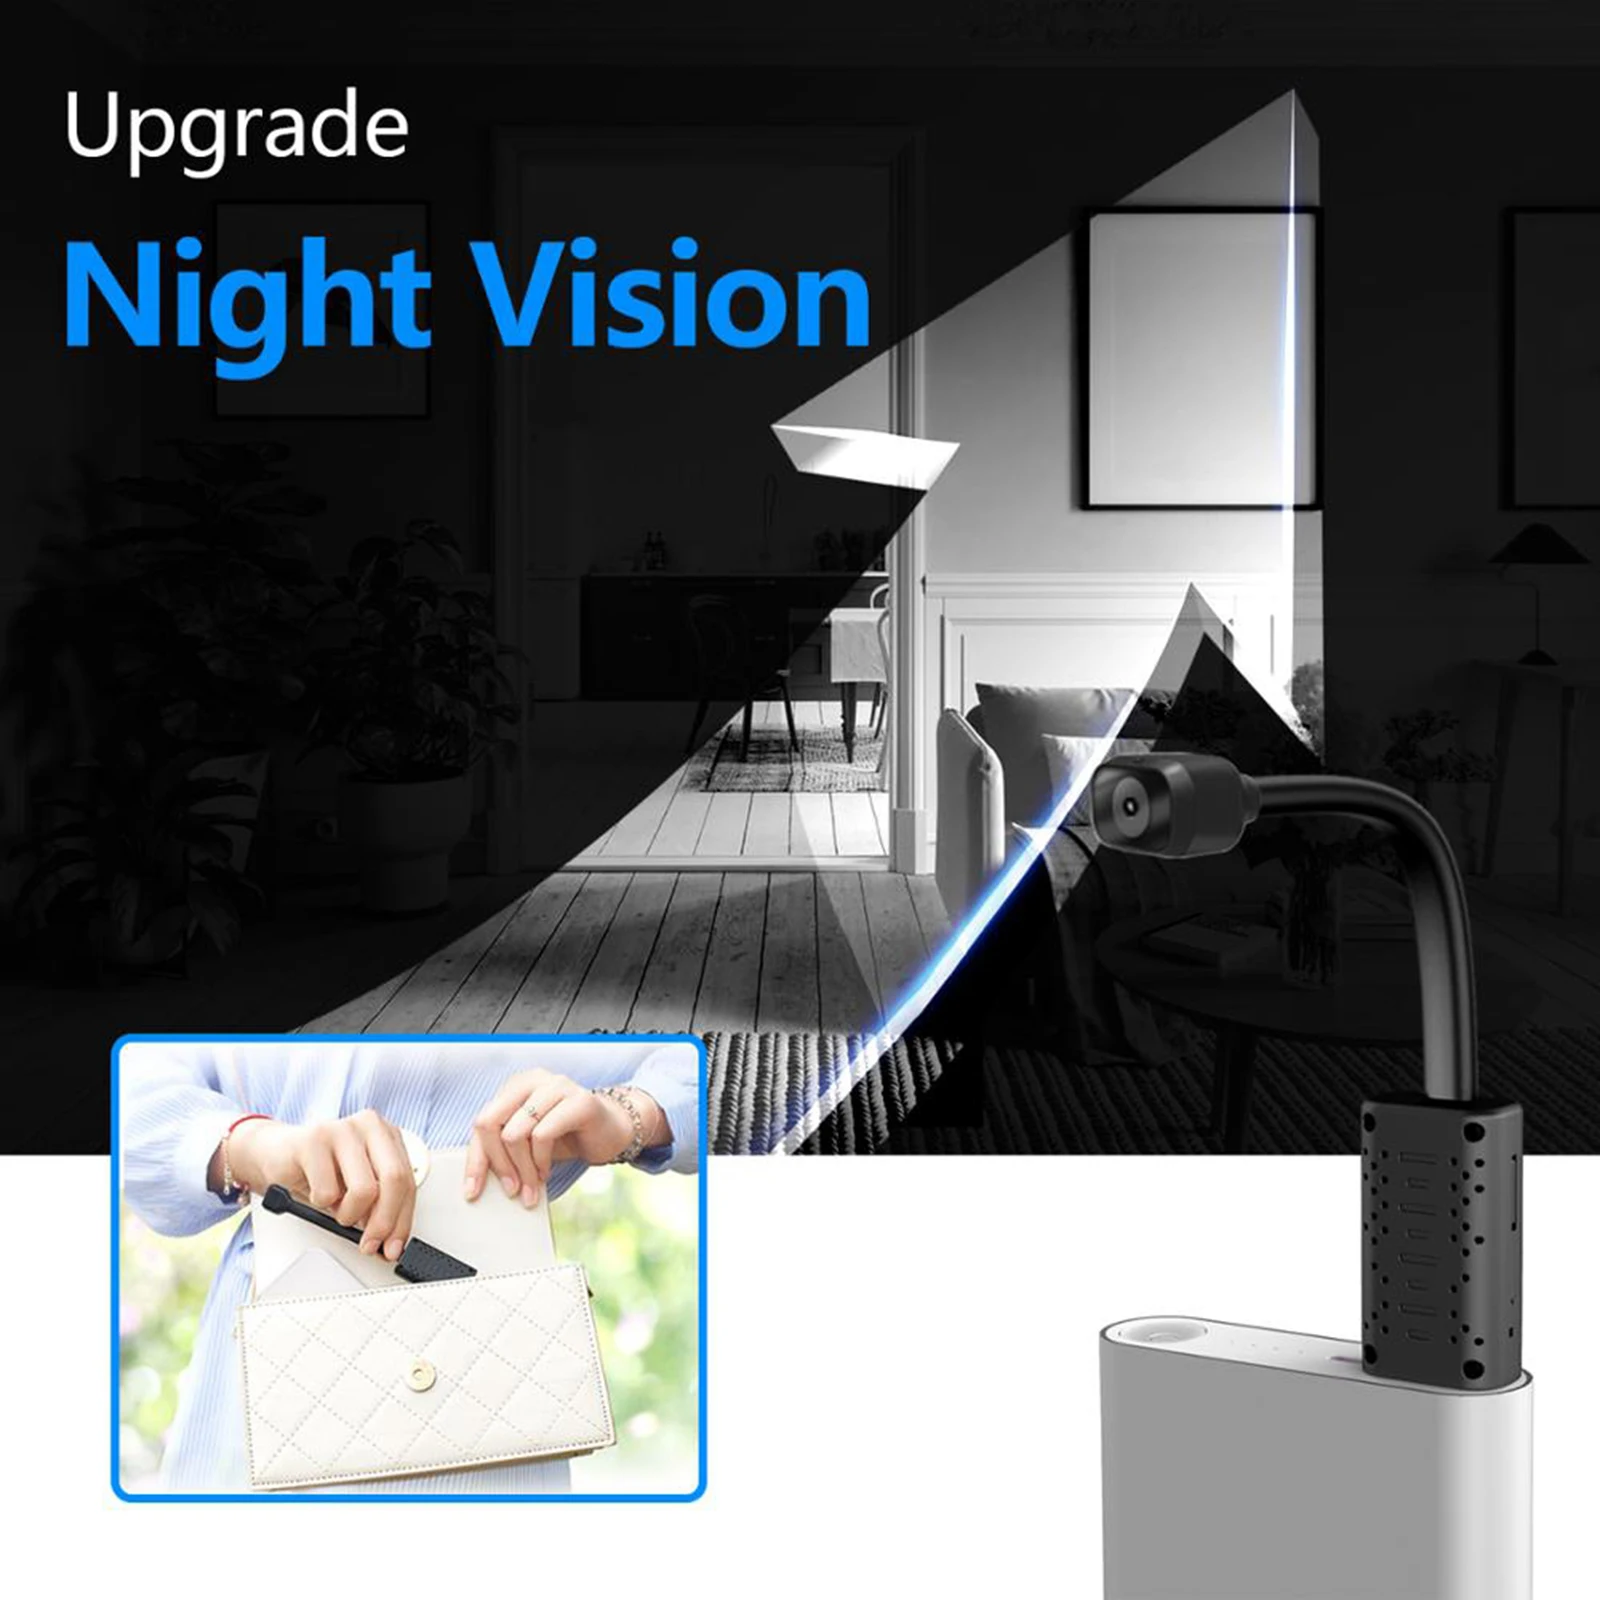 Smart USB Wireless Flexible Night Vision Camera Monitoring for Indoor Security Pet Working